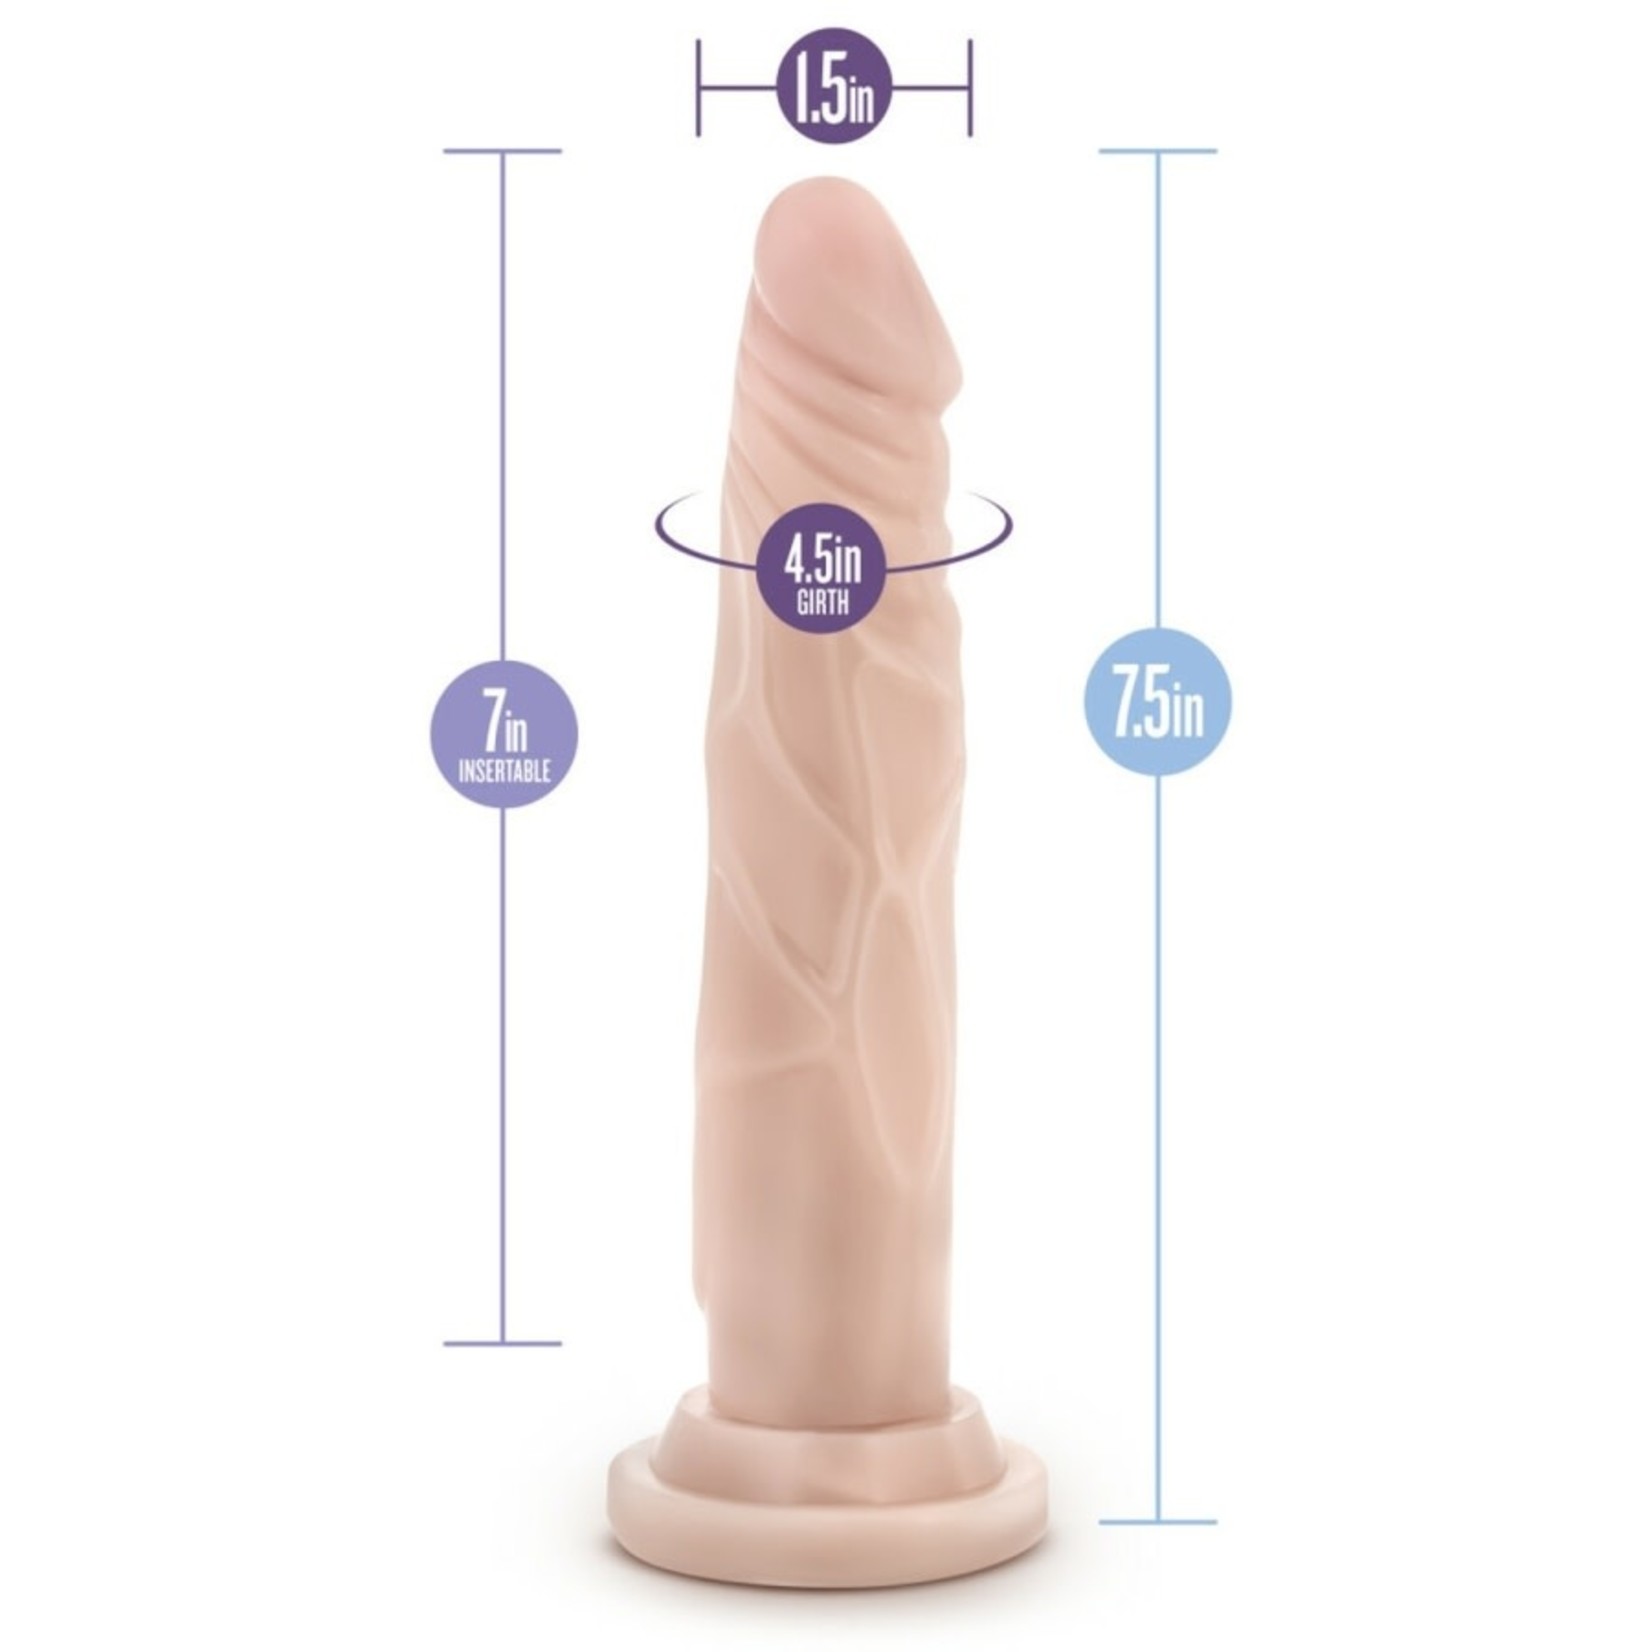 DR. SKIN BLUSH - DR. SKIN SILICONE - DR. CARTER - 7 INCH DONG WITH SUCTION CUP - VANILLA